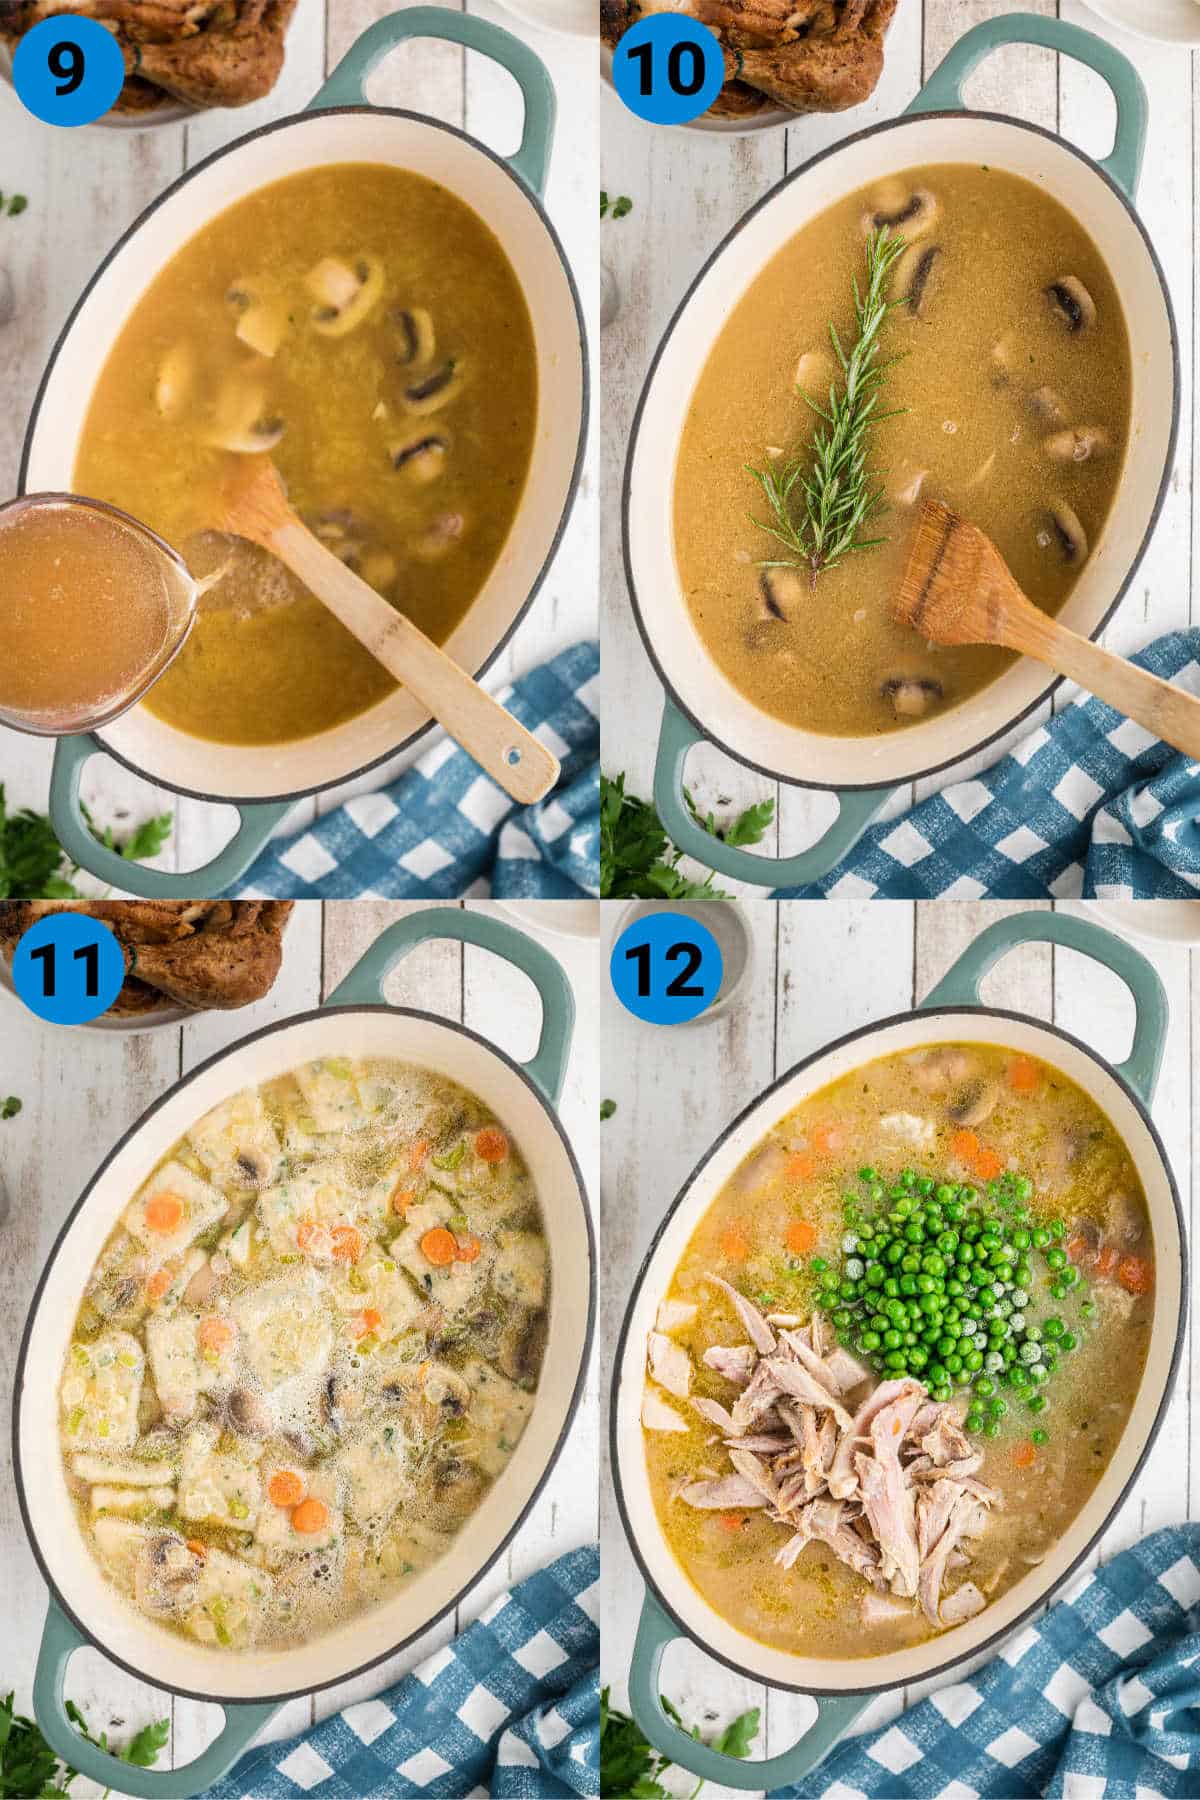 A collage of four images showing how to make chicken dumpling soup recipe steps 9-12.